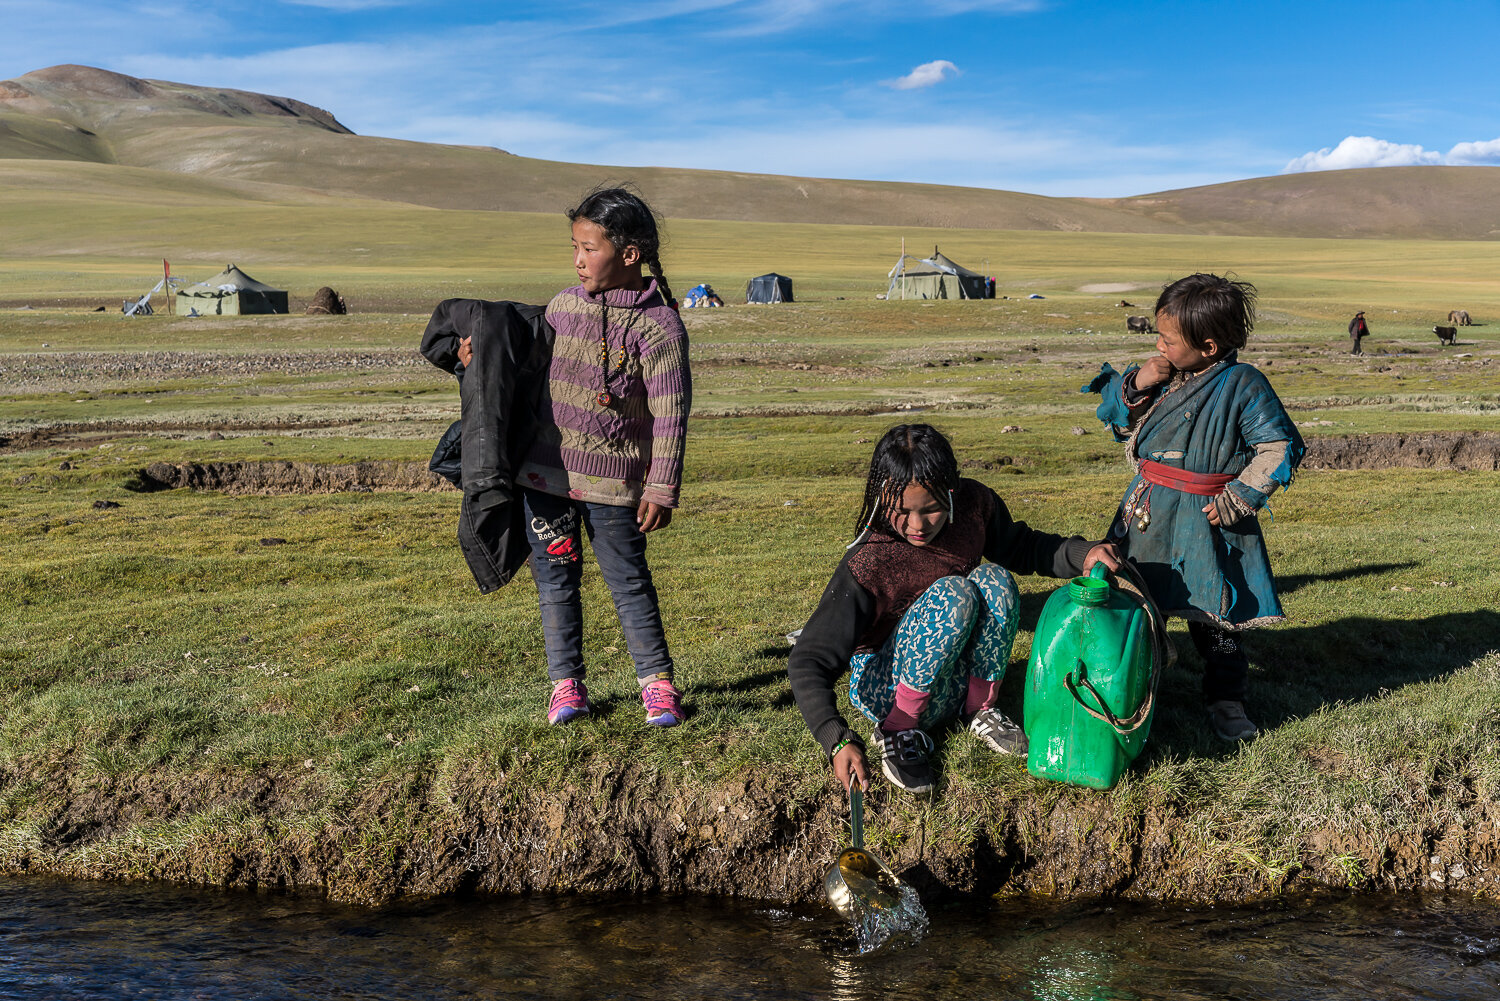  Kalzang Tseden, 14, center, collects water from the Indus River as Yeshi Lhumu, 7, left, and Samnor, 5, right, watch near their nomad camp along the Indus River on Friday, September 6, 2019 in Gê'gyai County, Ngari Prefecture, Tibet, China. 